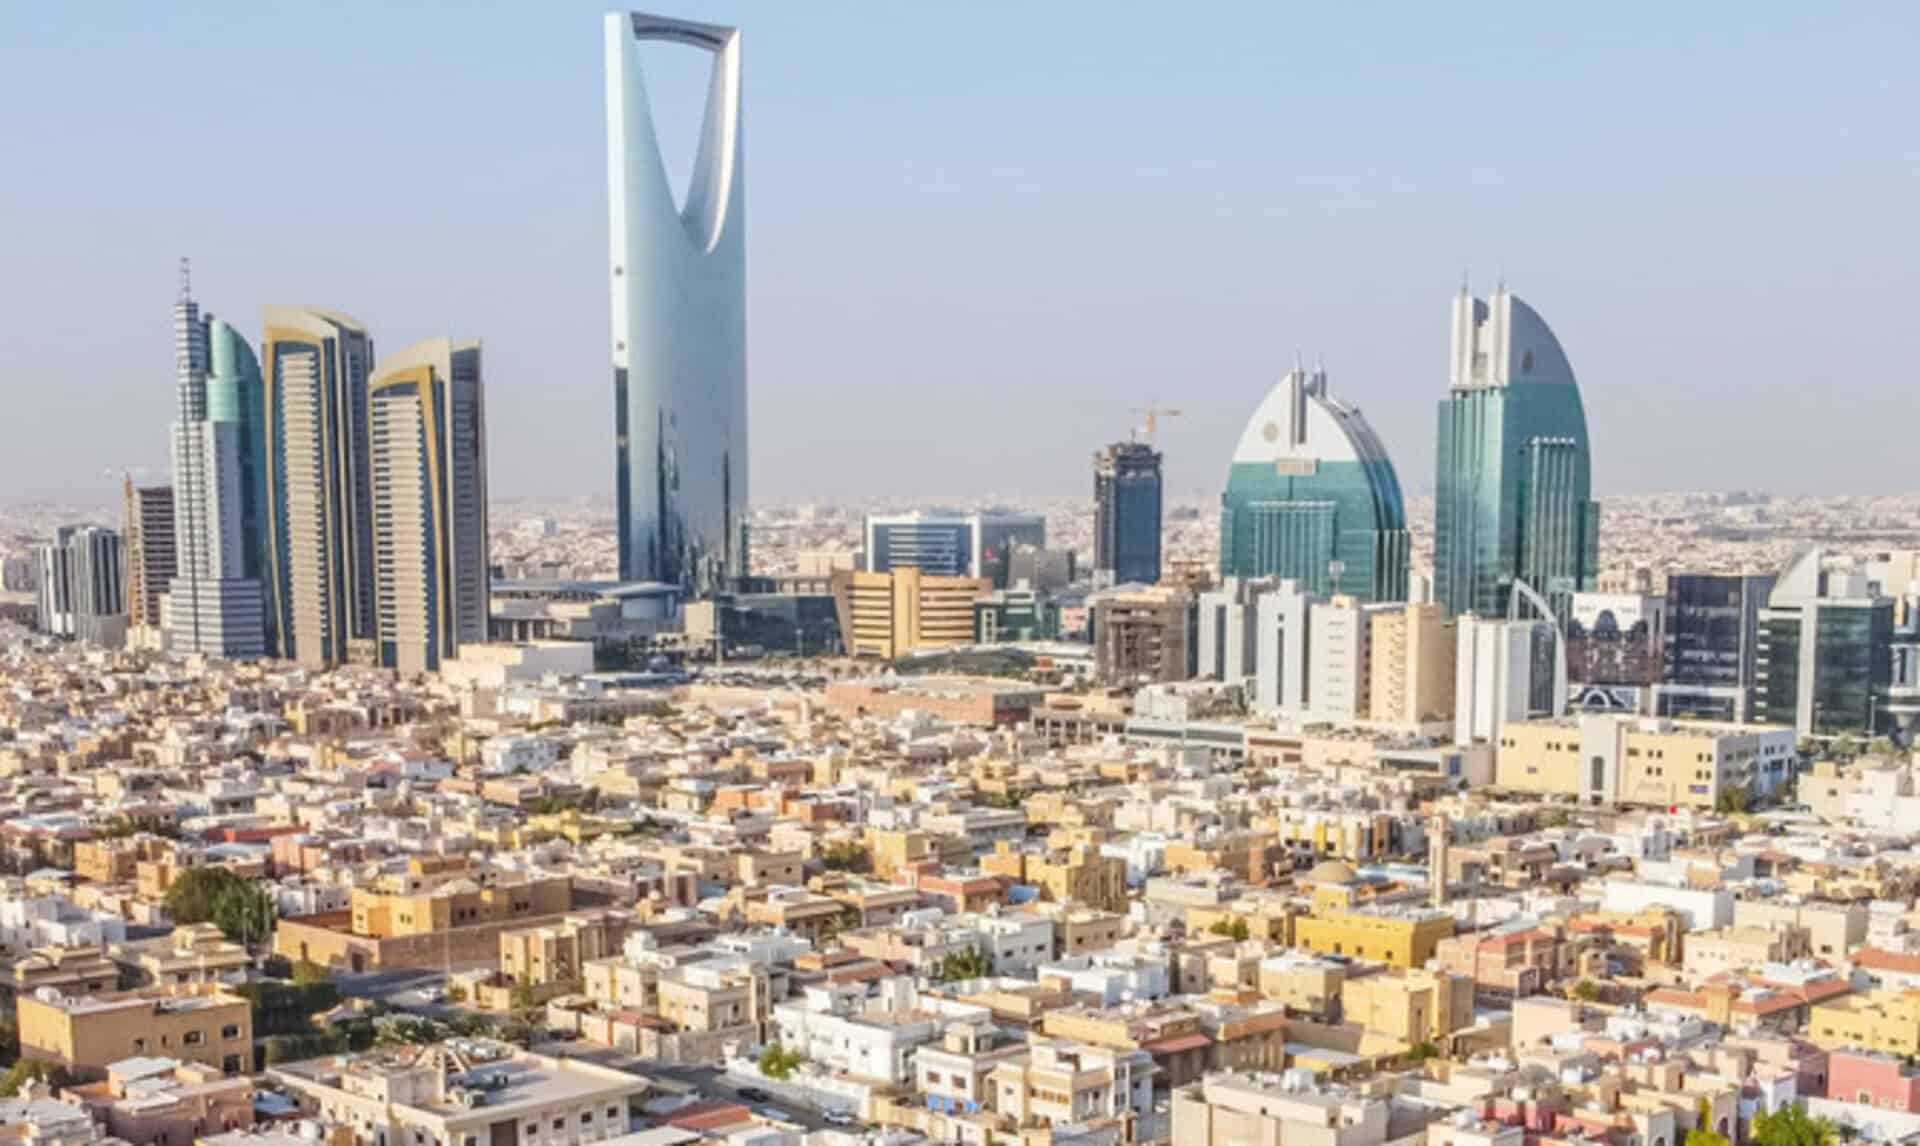 Saudi Quality of Life Program Inks $200m Deals to Promote Positive Living